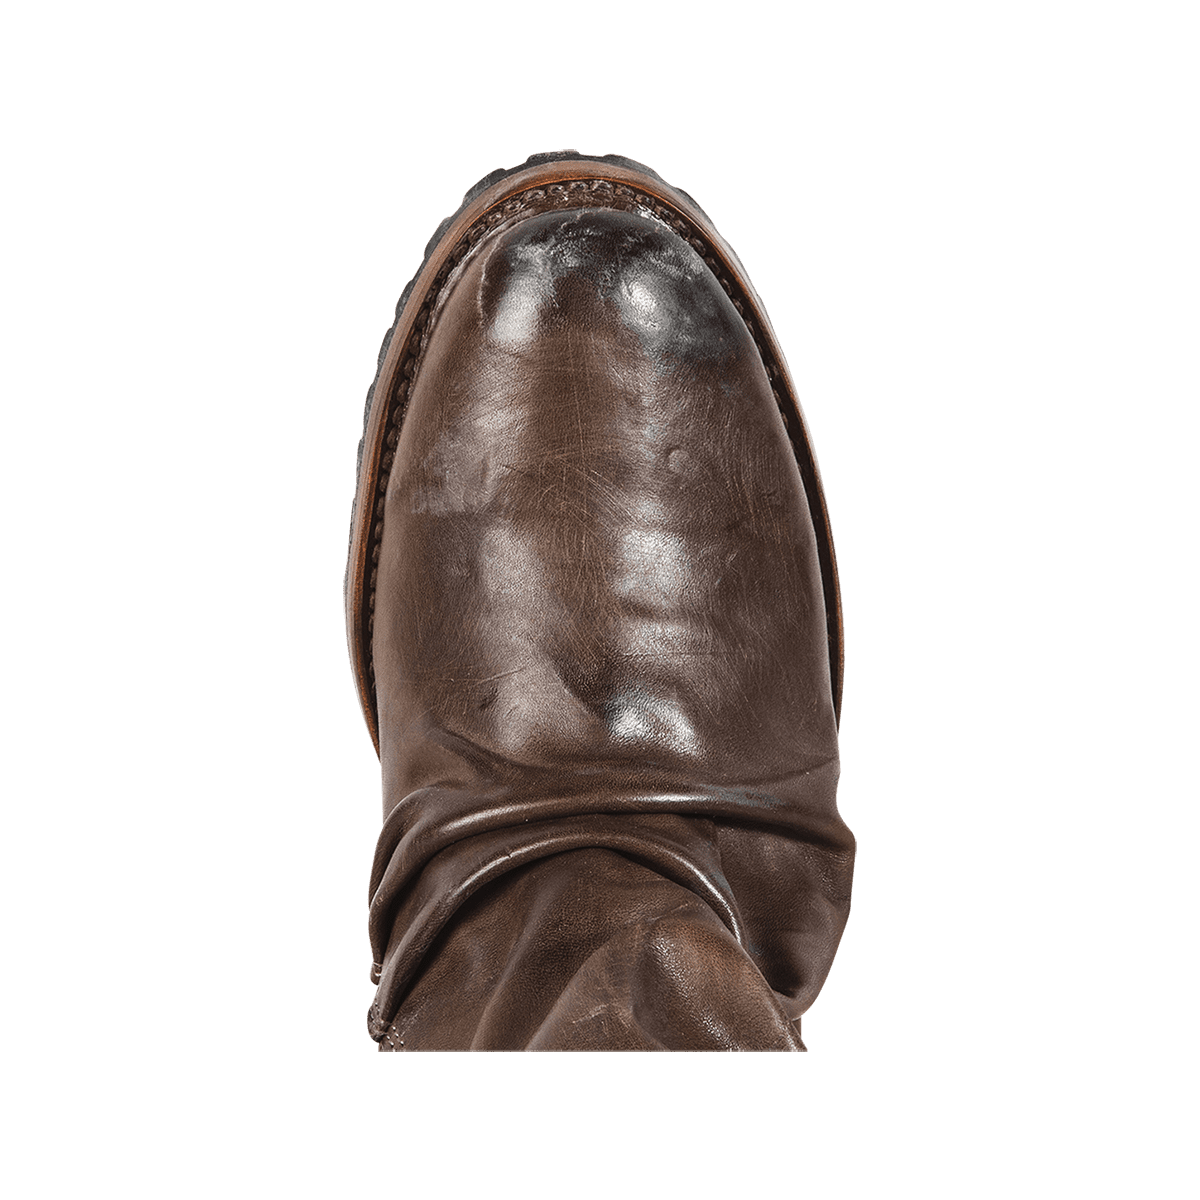 Top view showing gathered leather on FREEBIRD men's Beck stone ankle boot